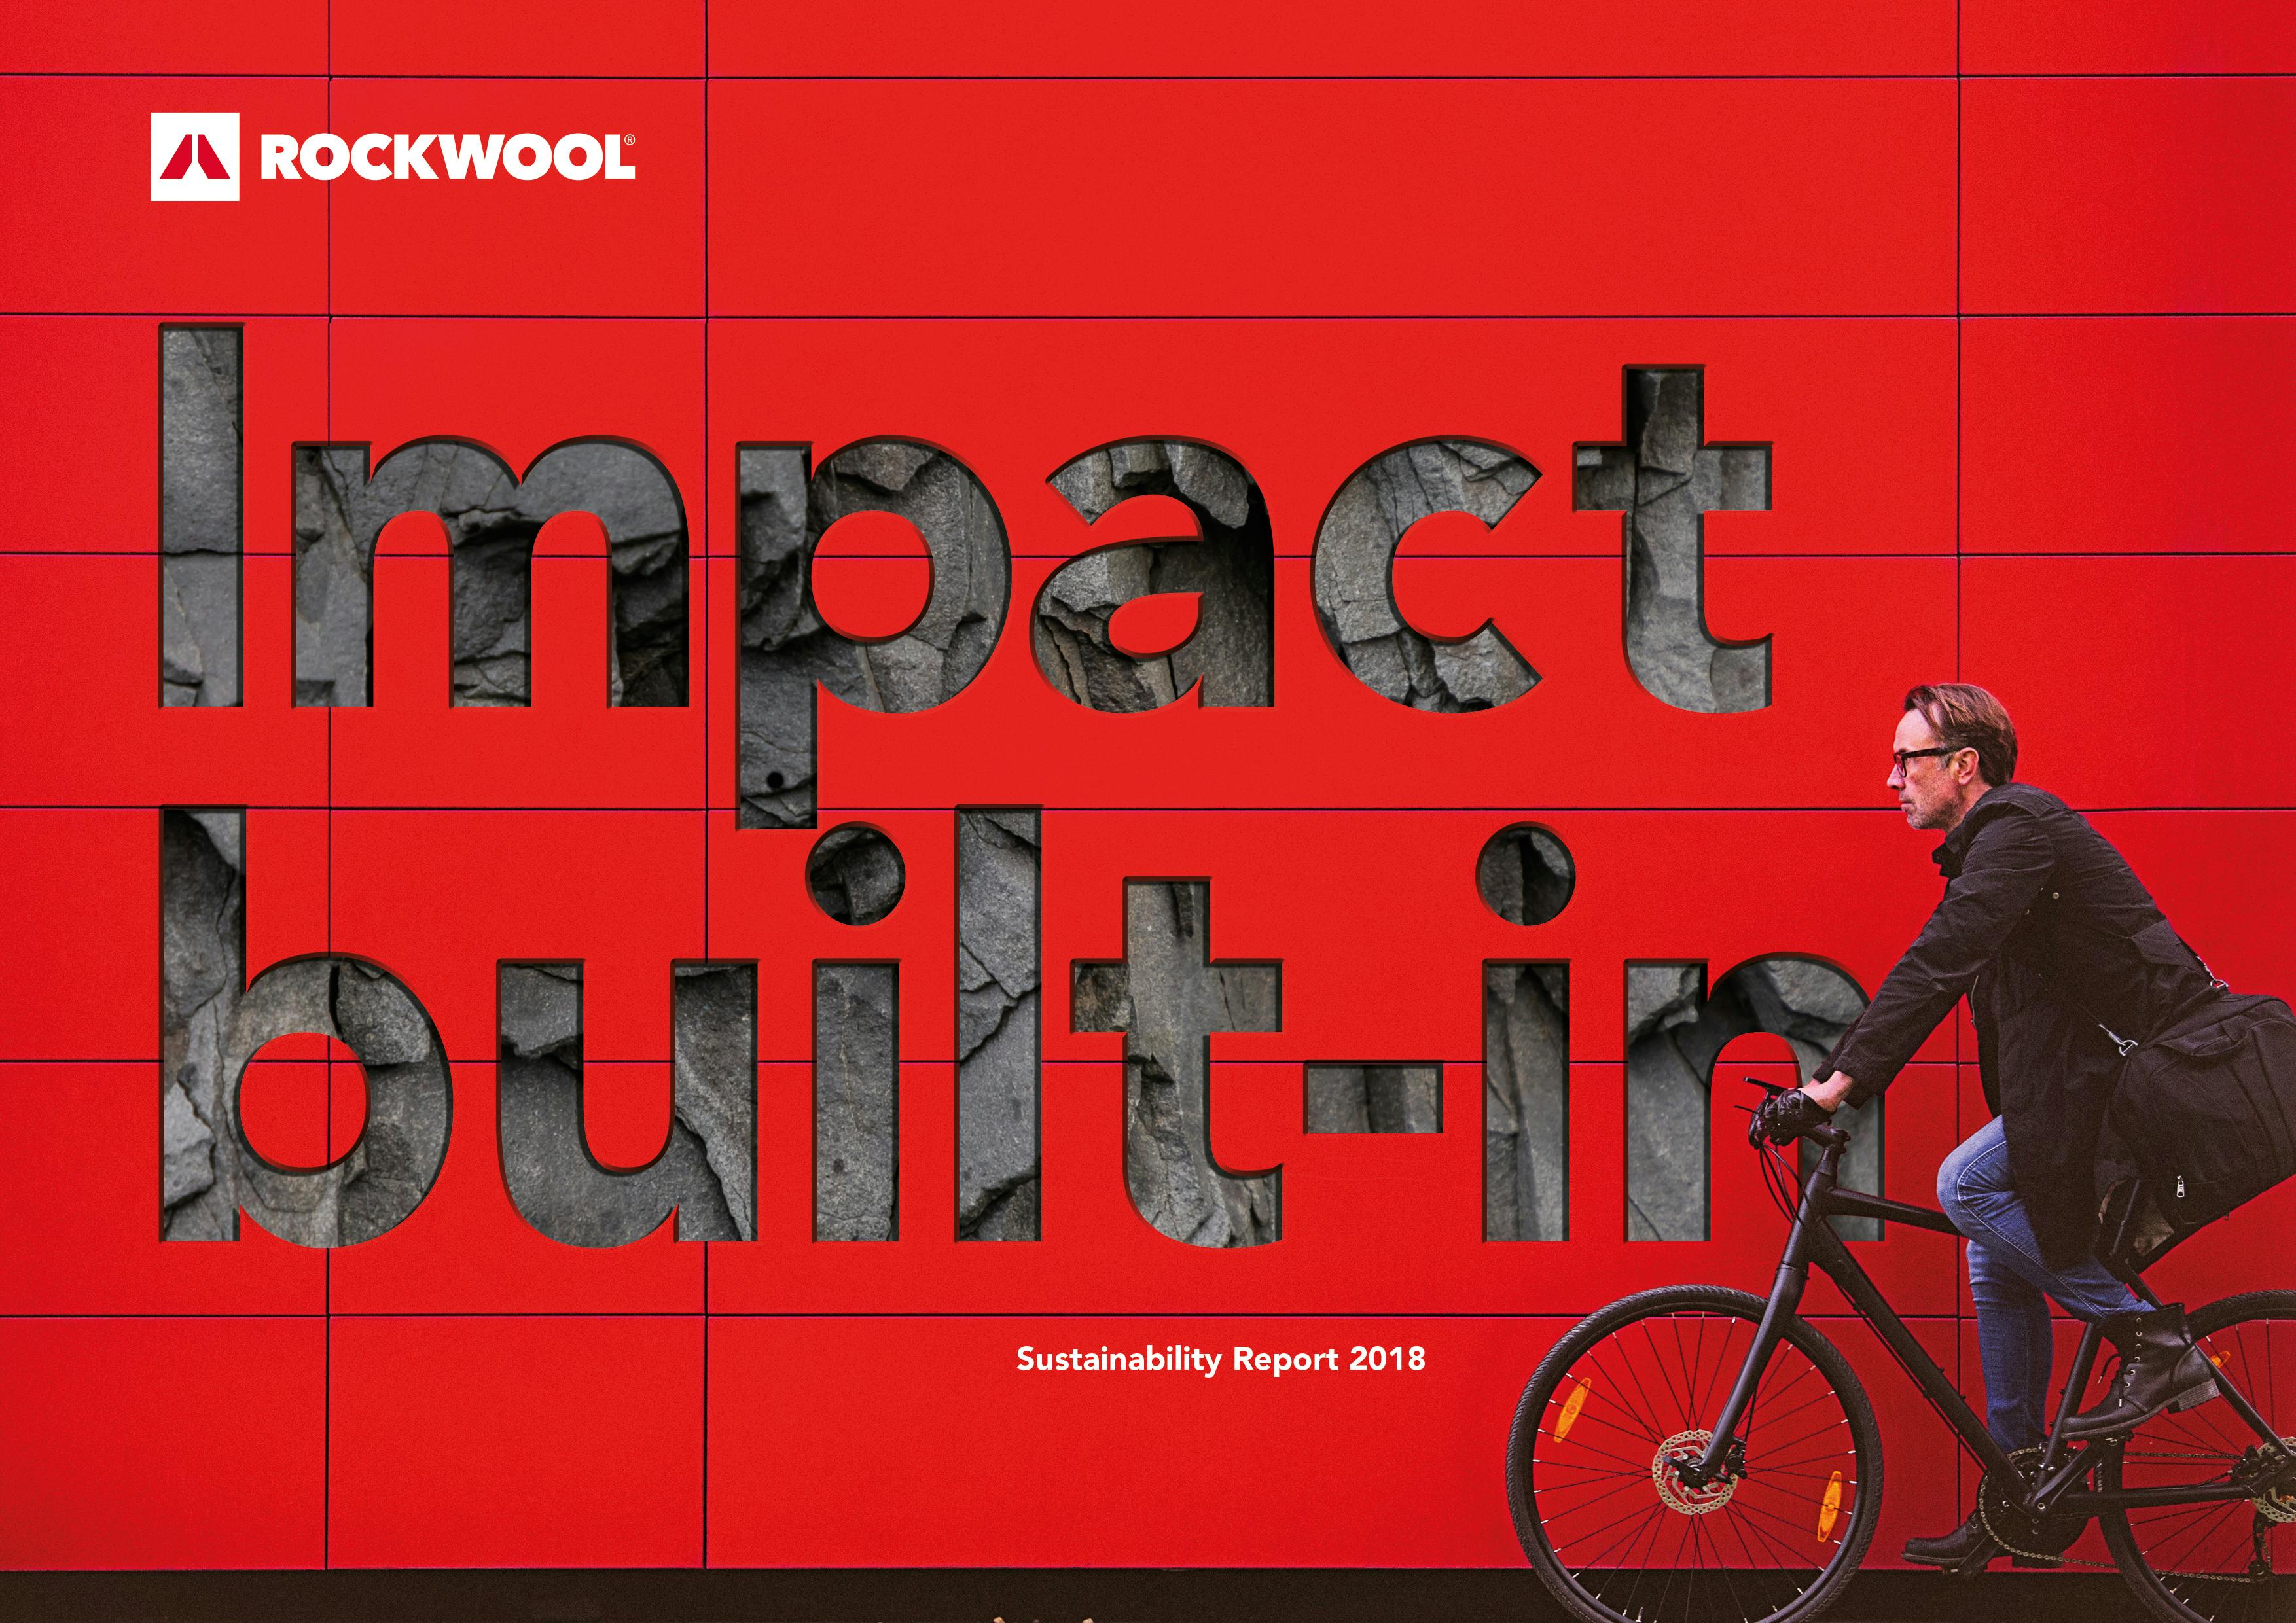 WILL BE DELETED  (safety issues) Man riding a bicycle in front of a red wall. Used for Sustainability Report 2018.